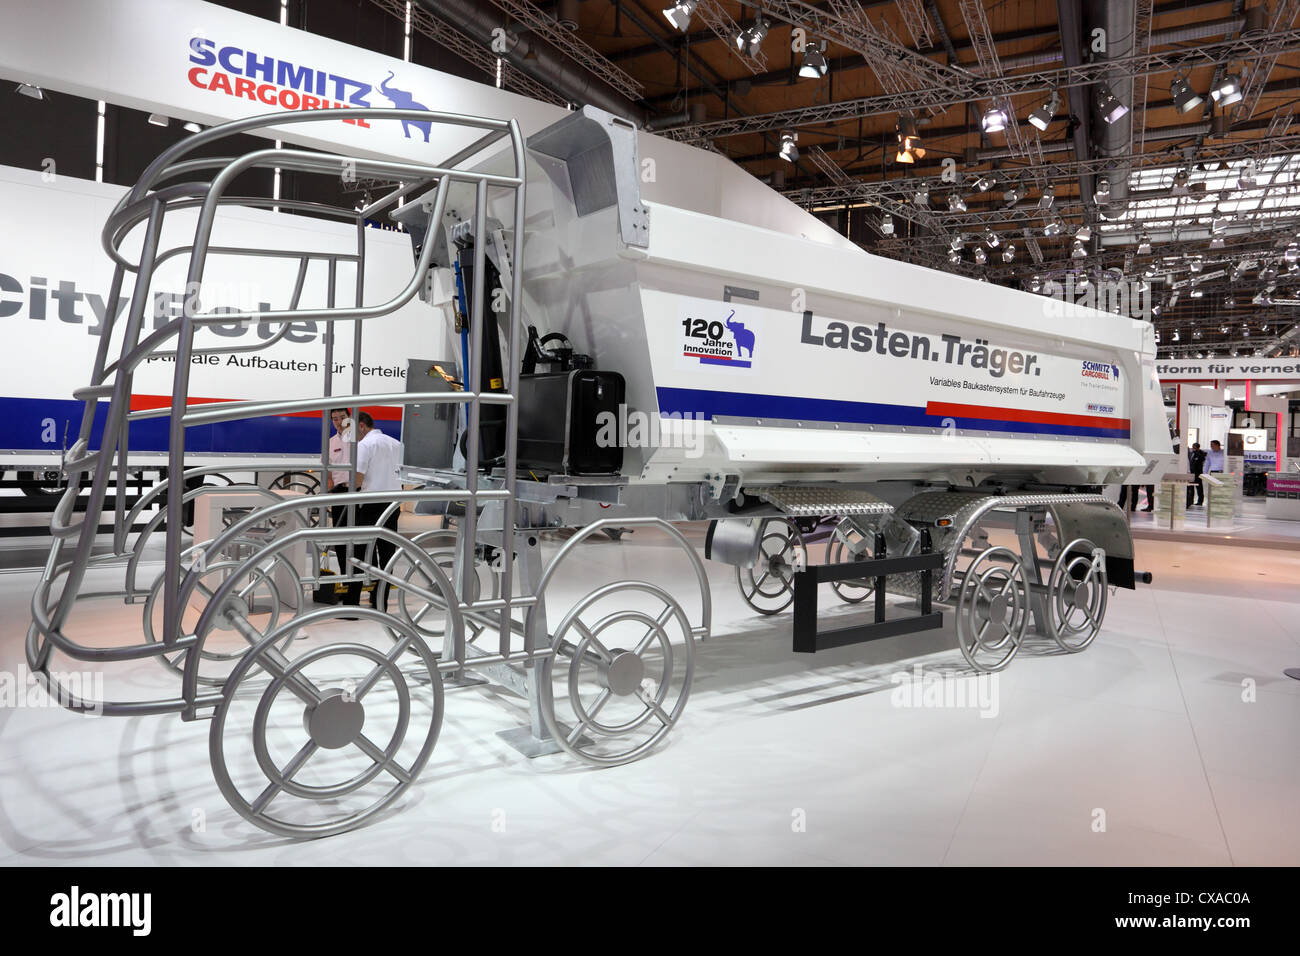 Schmitz Cargobull Stand at the International Motor Show for Commercial Vehicles Stock Photo